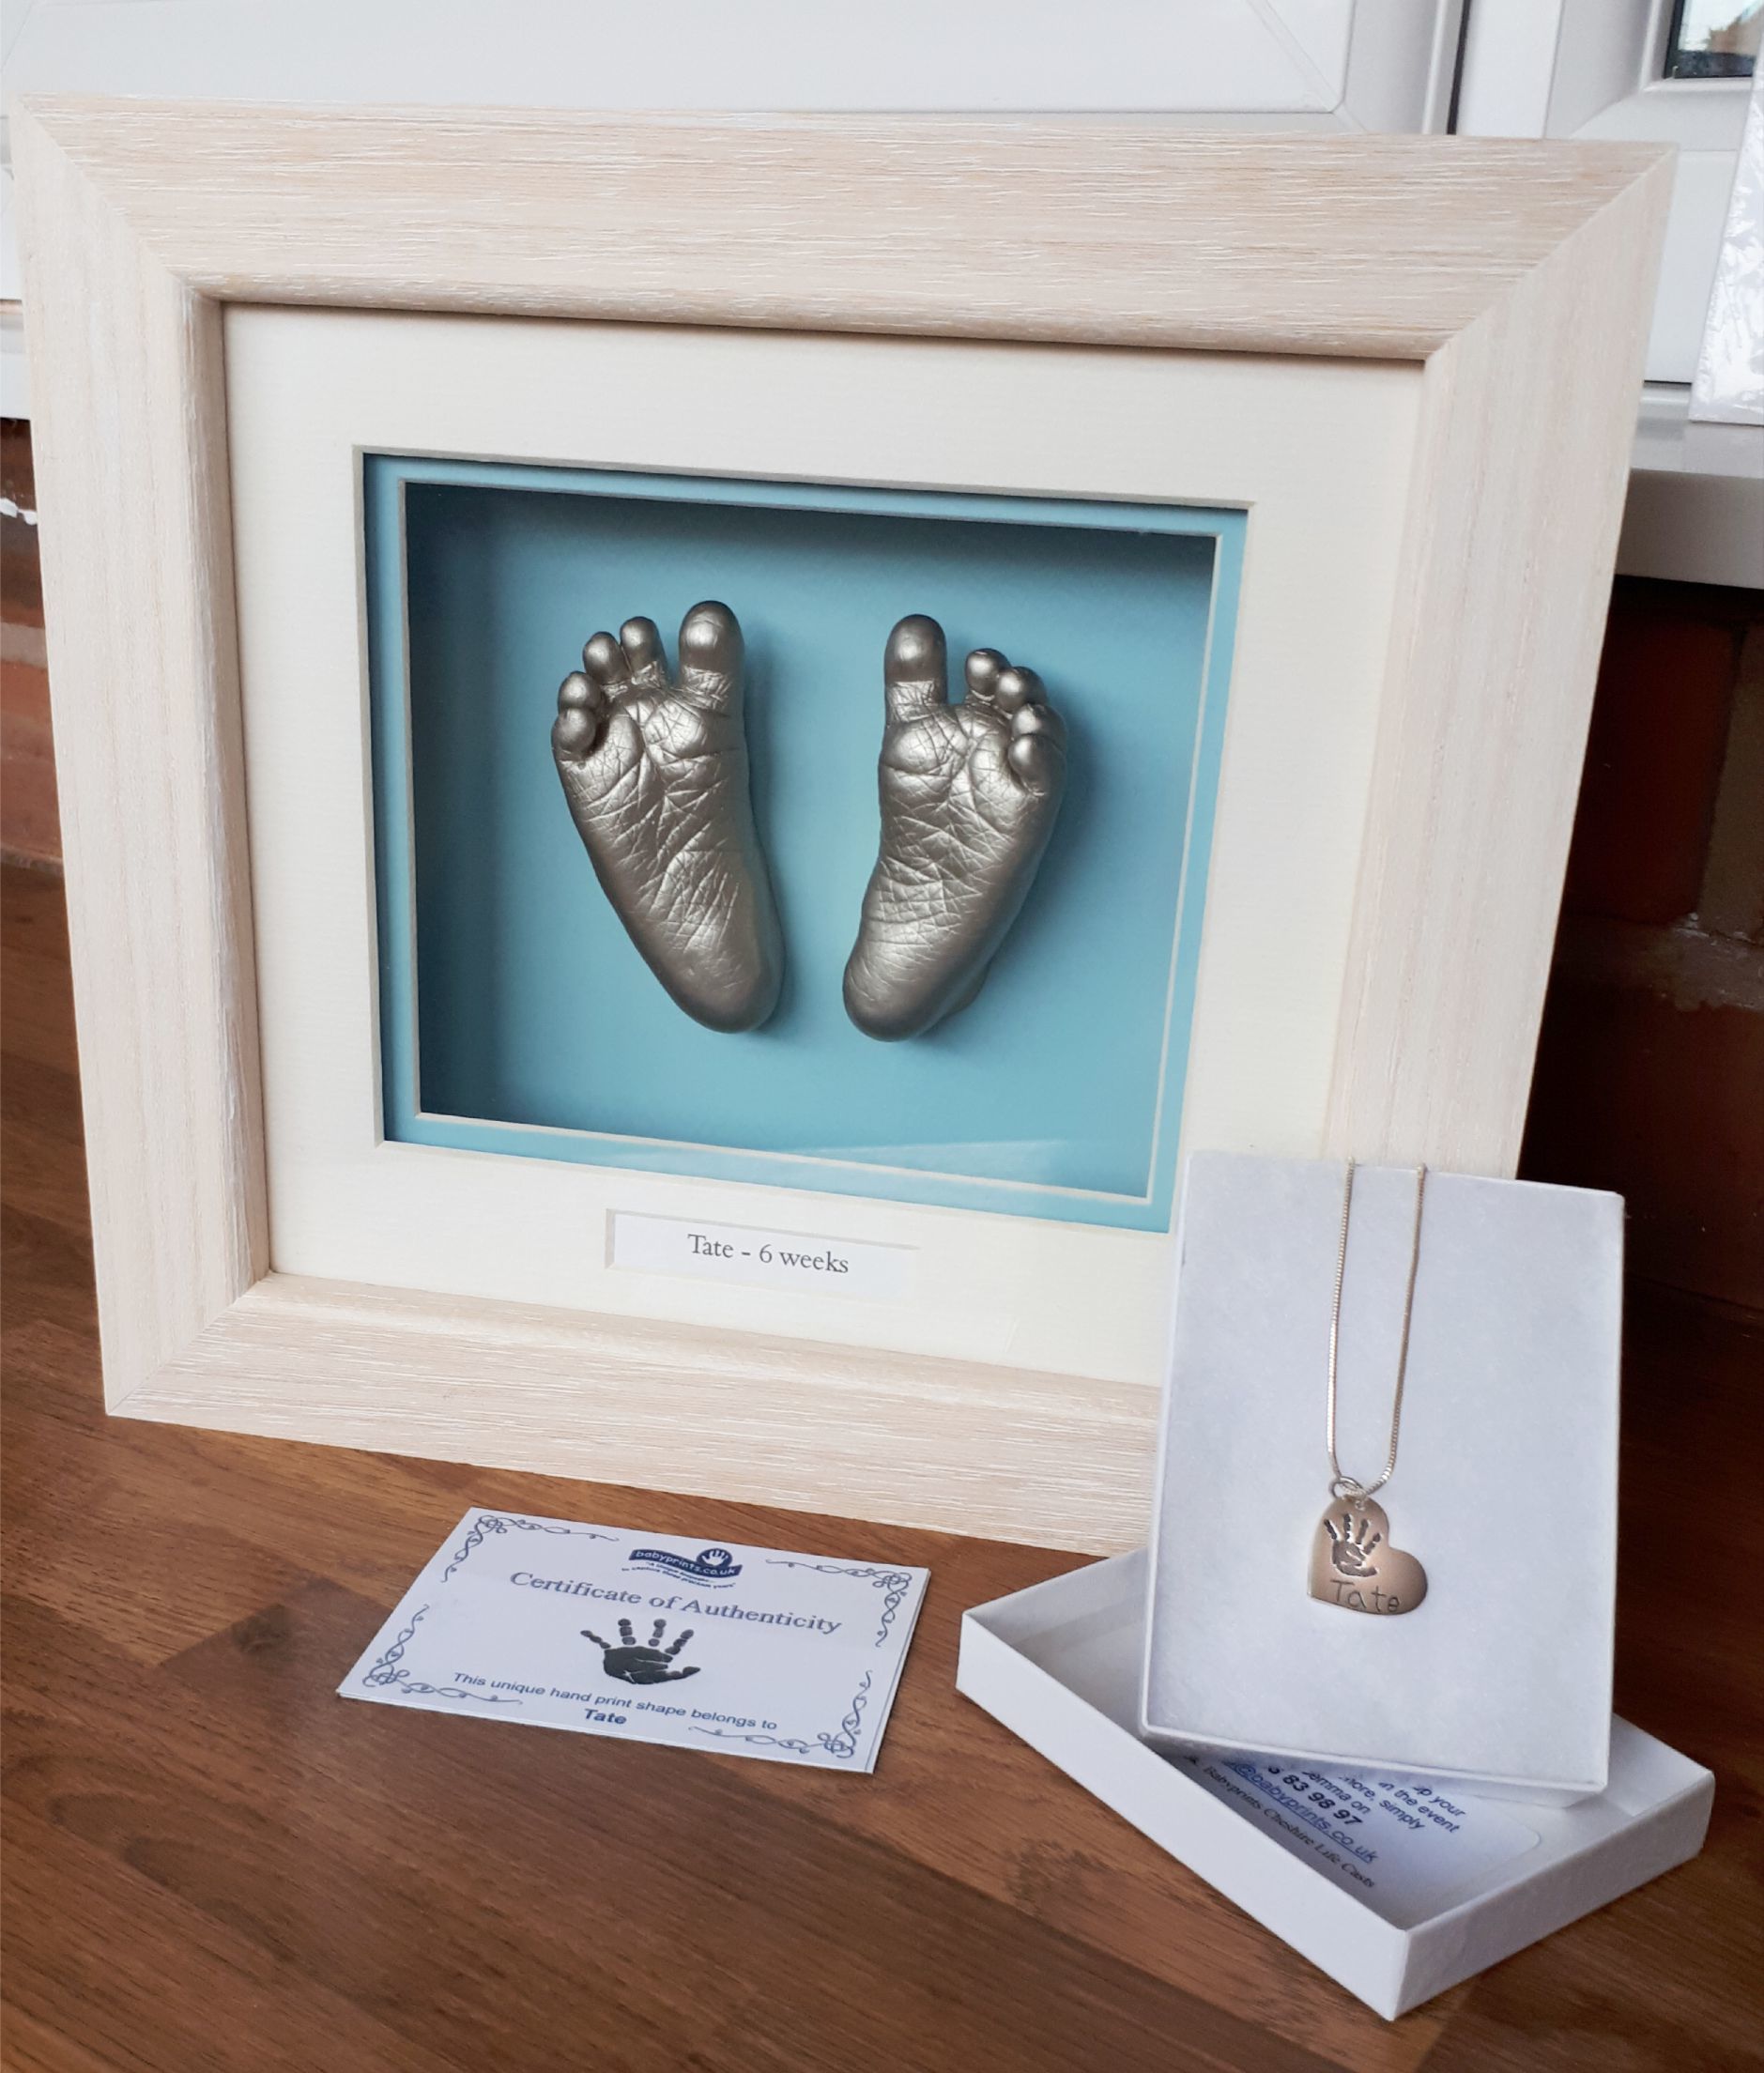 Quality baby feet casting near Chester